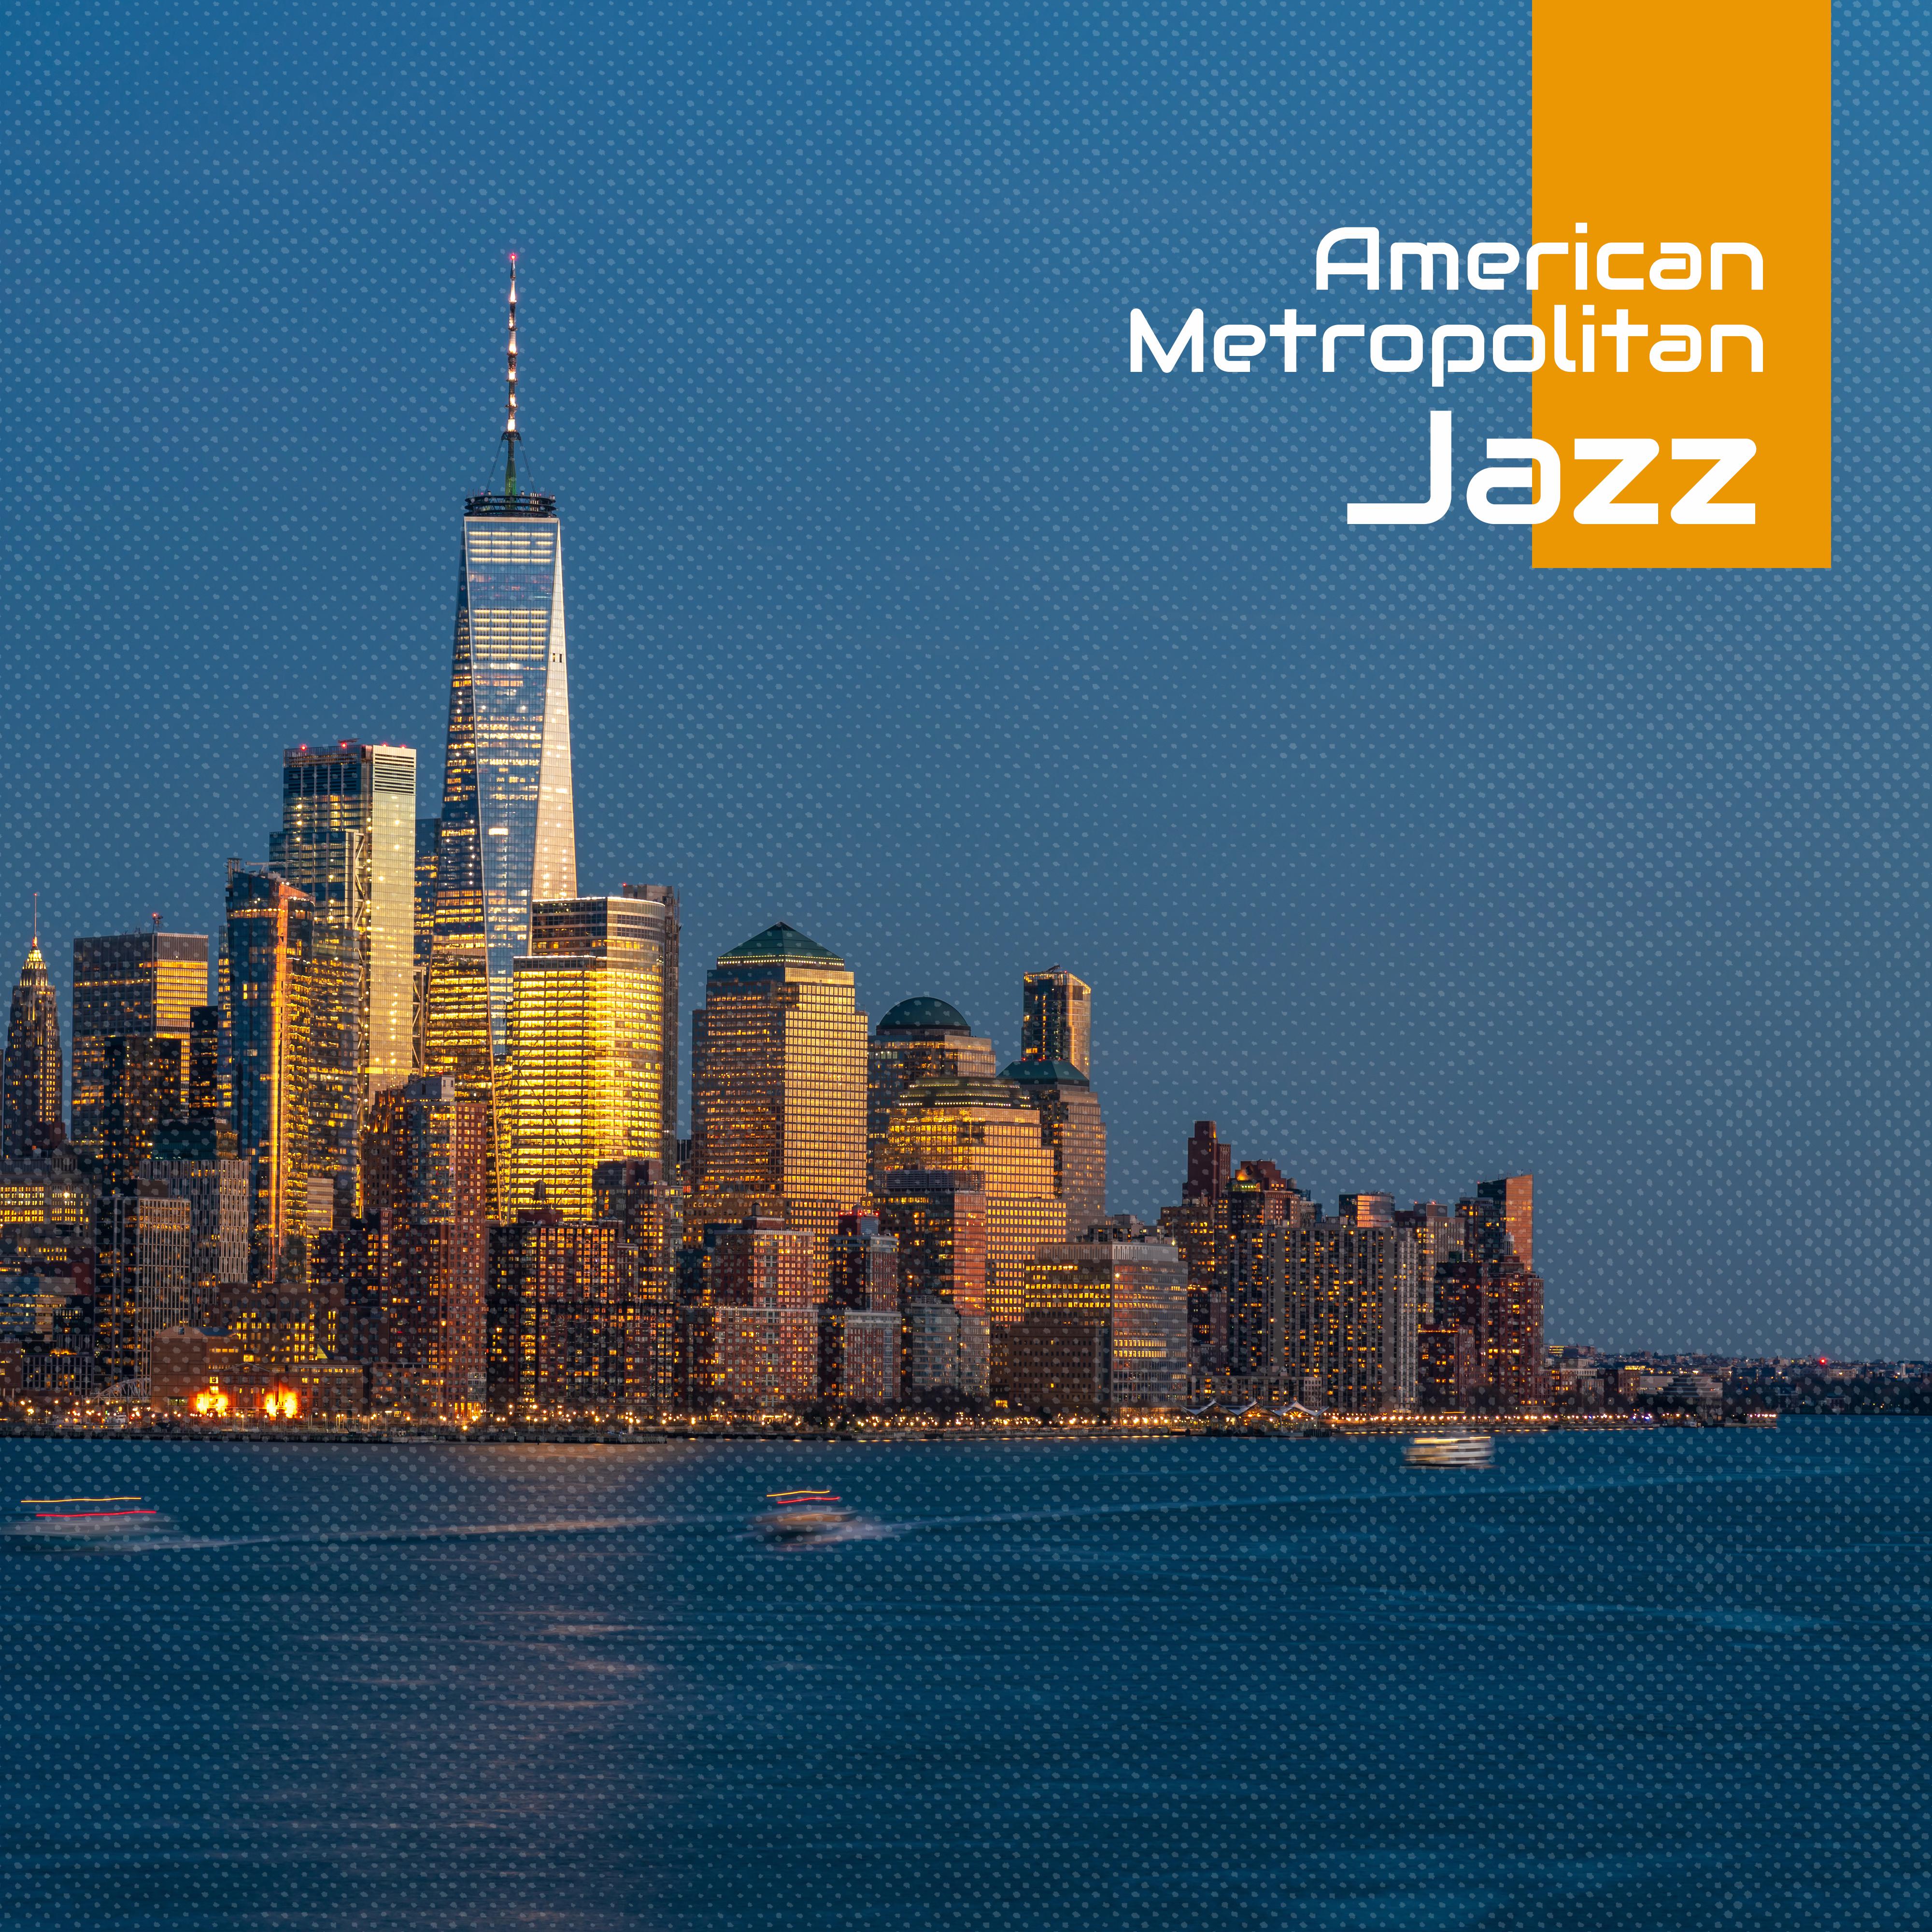 American Metropolitan Jazz - Instrumental Music from the Largest Cities of the U.S.A.